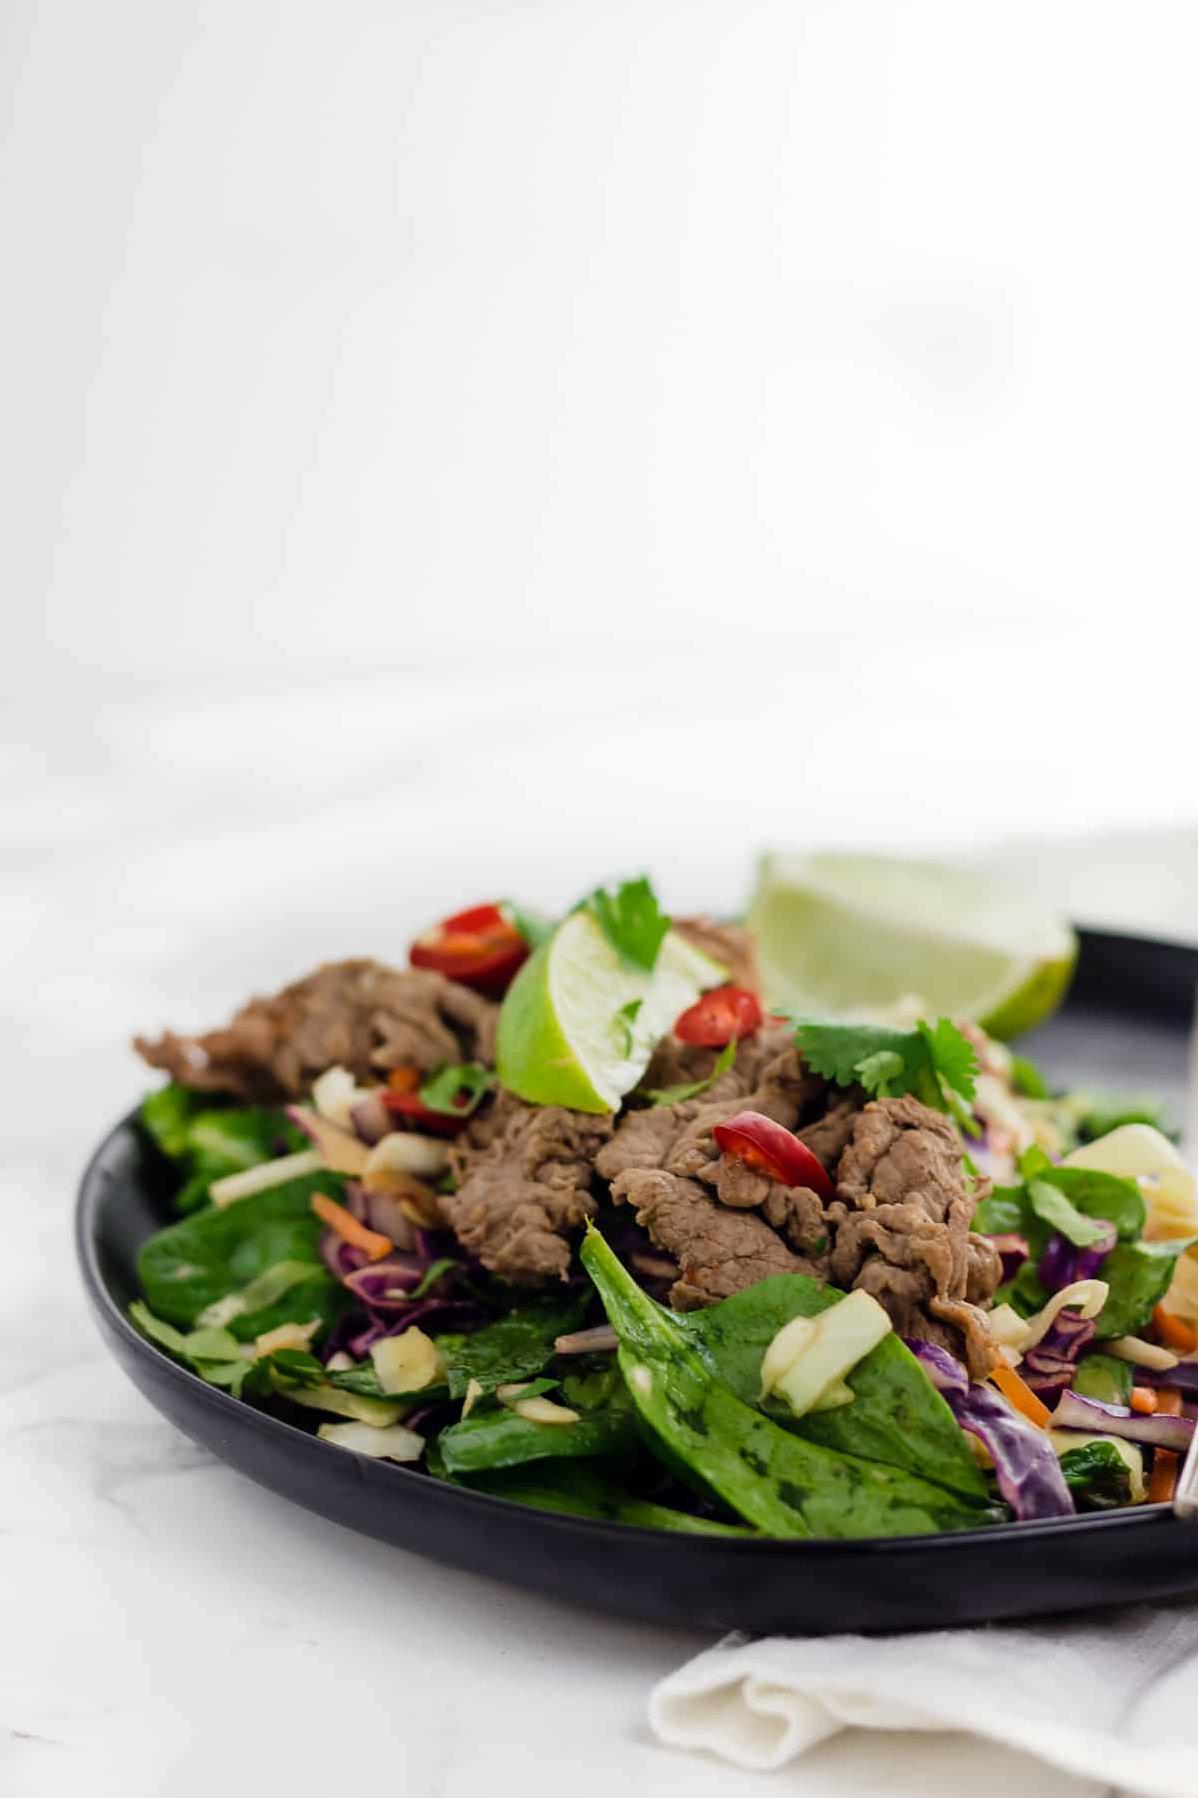  Perfect for lunch or dinner, this Oz Thai Beef Salad is gluten-free and delicious